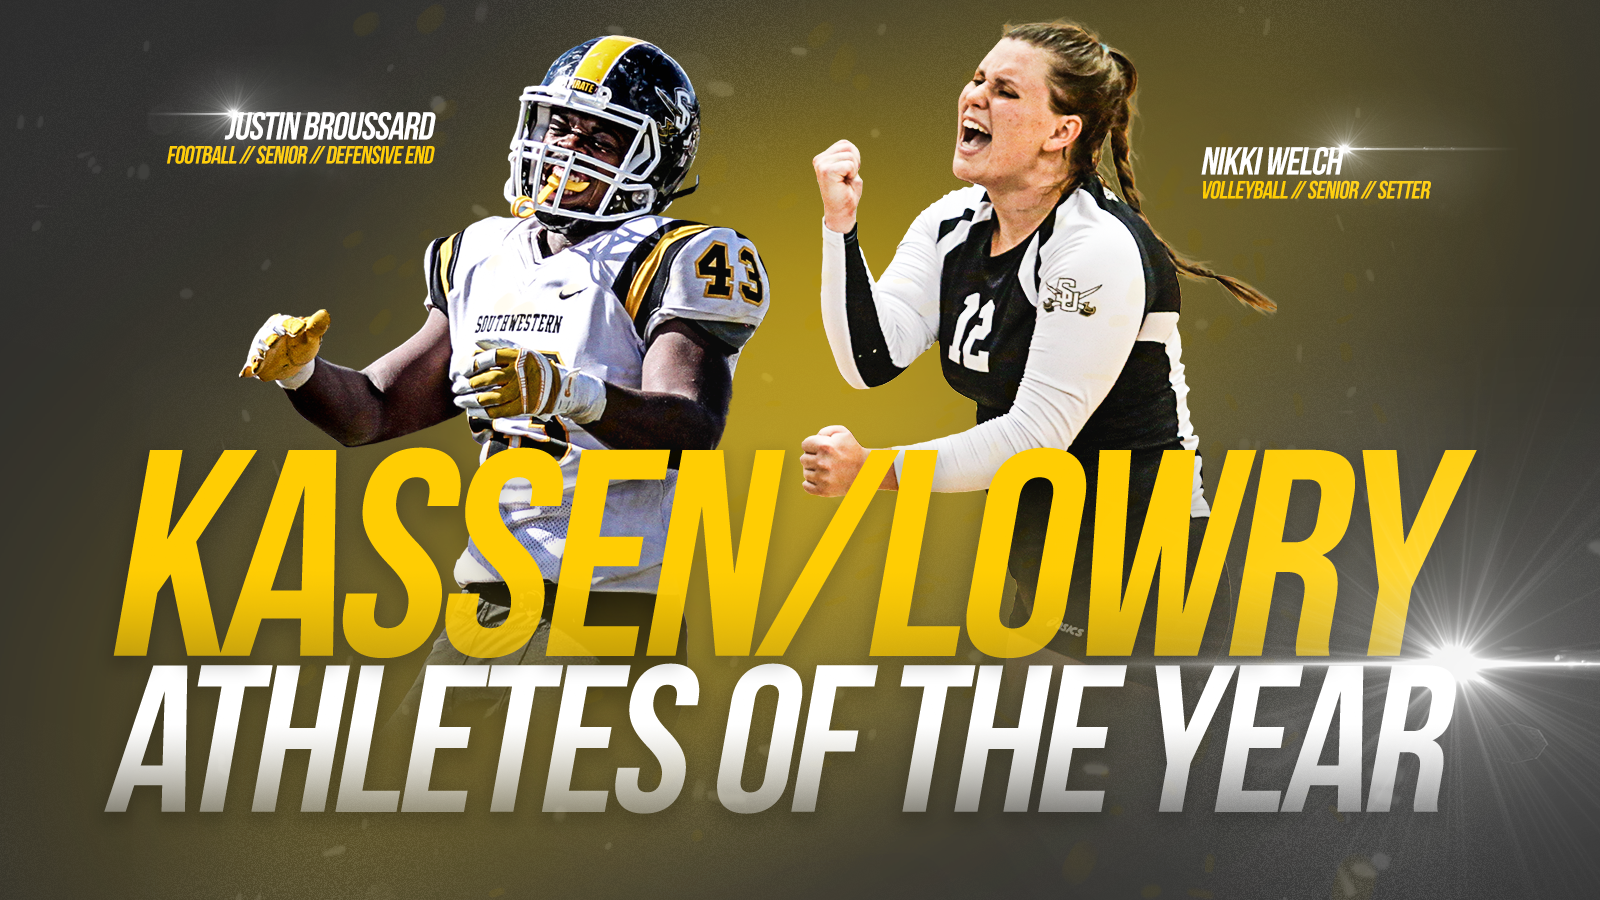 Broussard, Welch named Kassen/Lowry Athletes of the Year